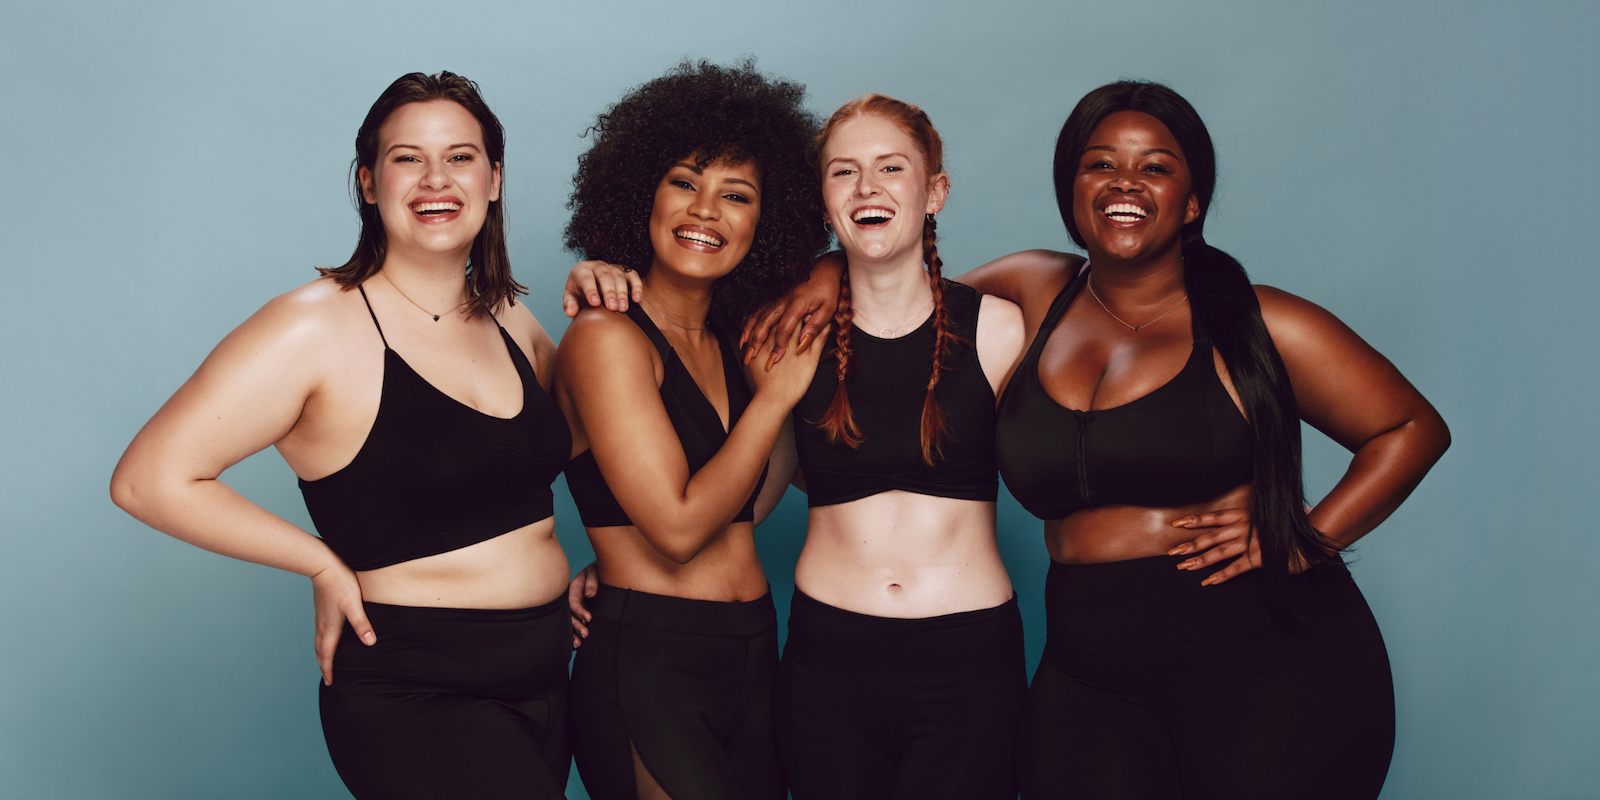 Four young women in black fitted yoga clothes stand against a blank blue wall linking arms and smiling into the camera: A white woman with medium-length brown hair, a Black woman with a brown Afro, a white woman with long red braids, and a Black women with her long dark hair pulled behind her and draping down her side.